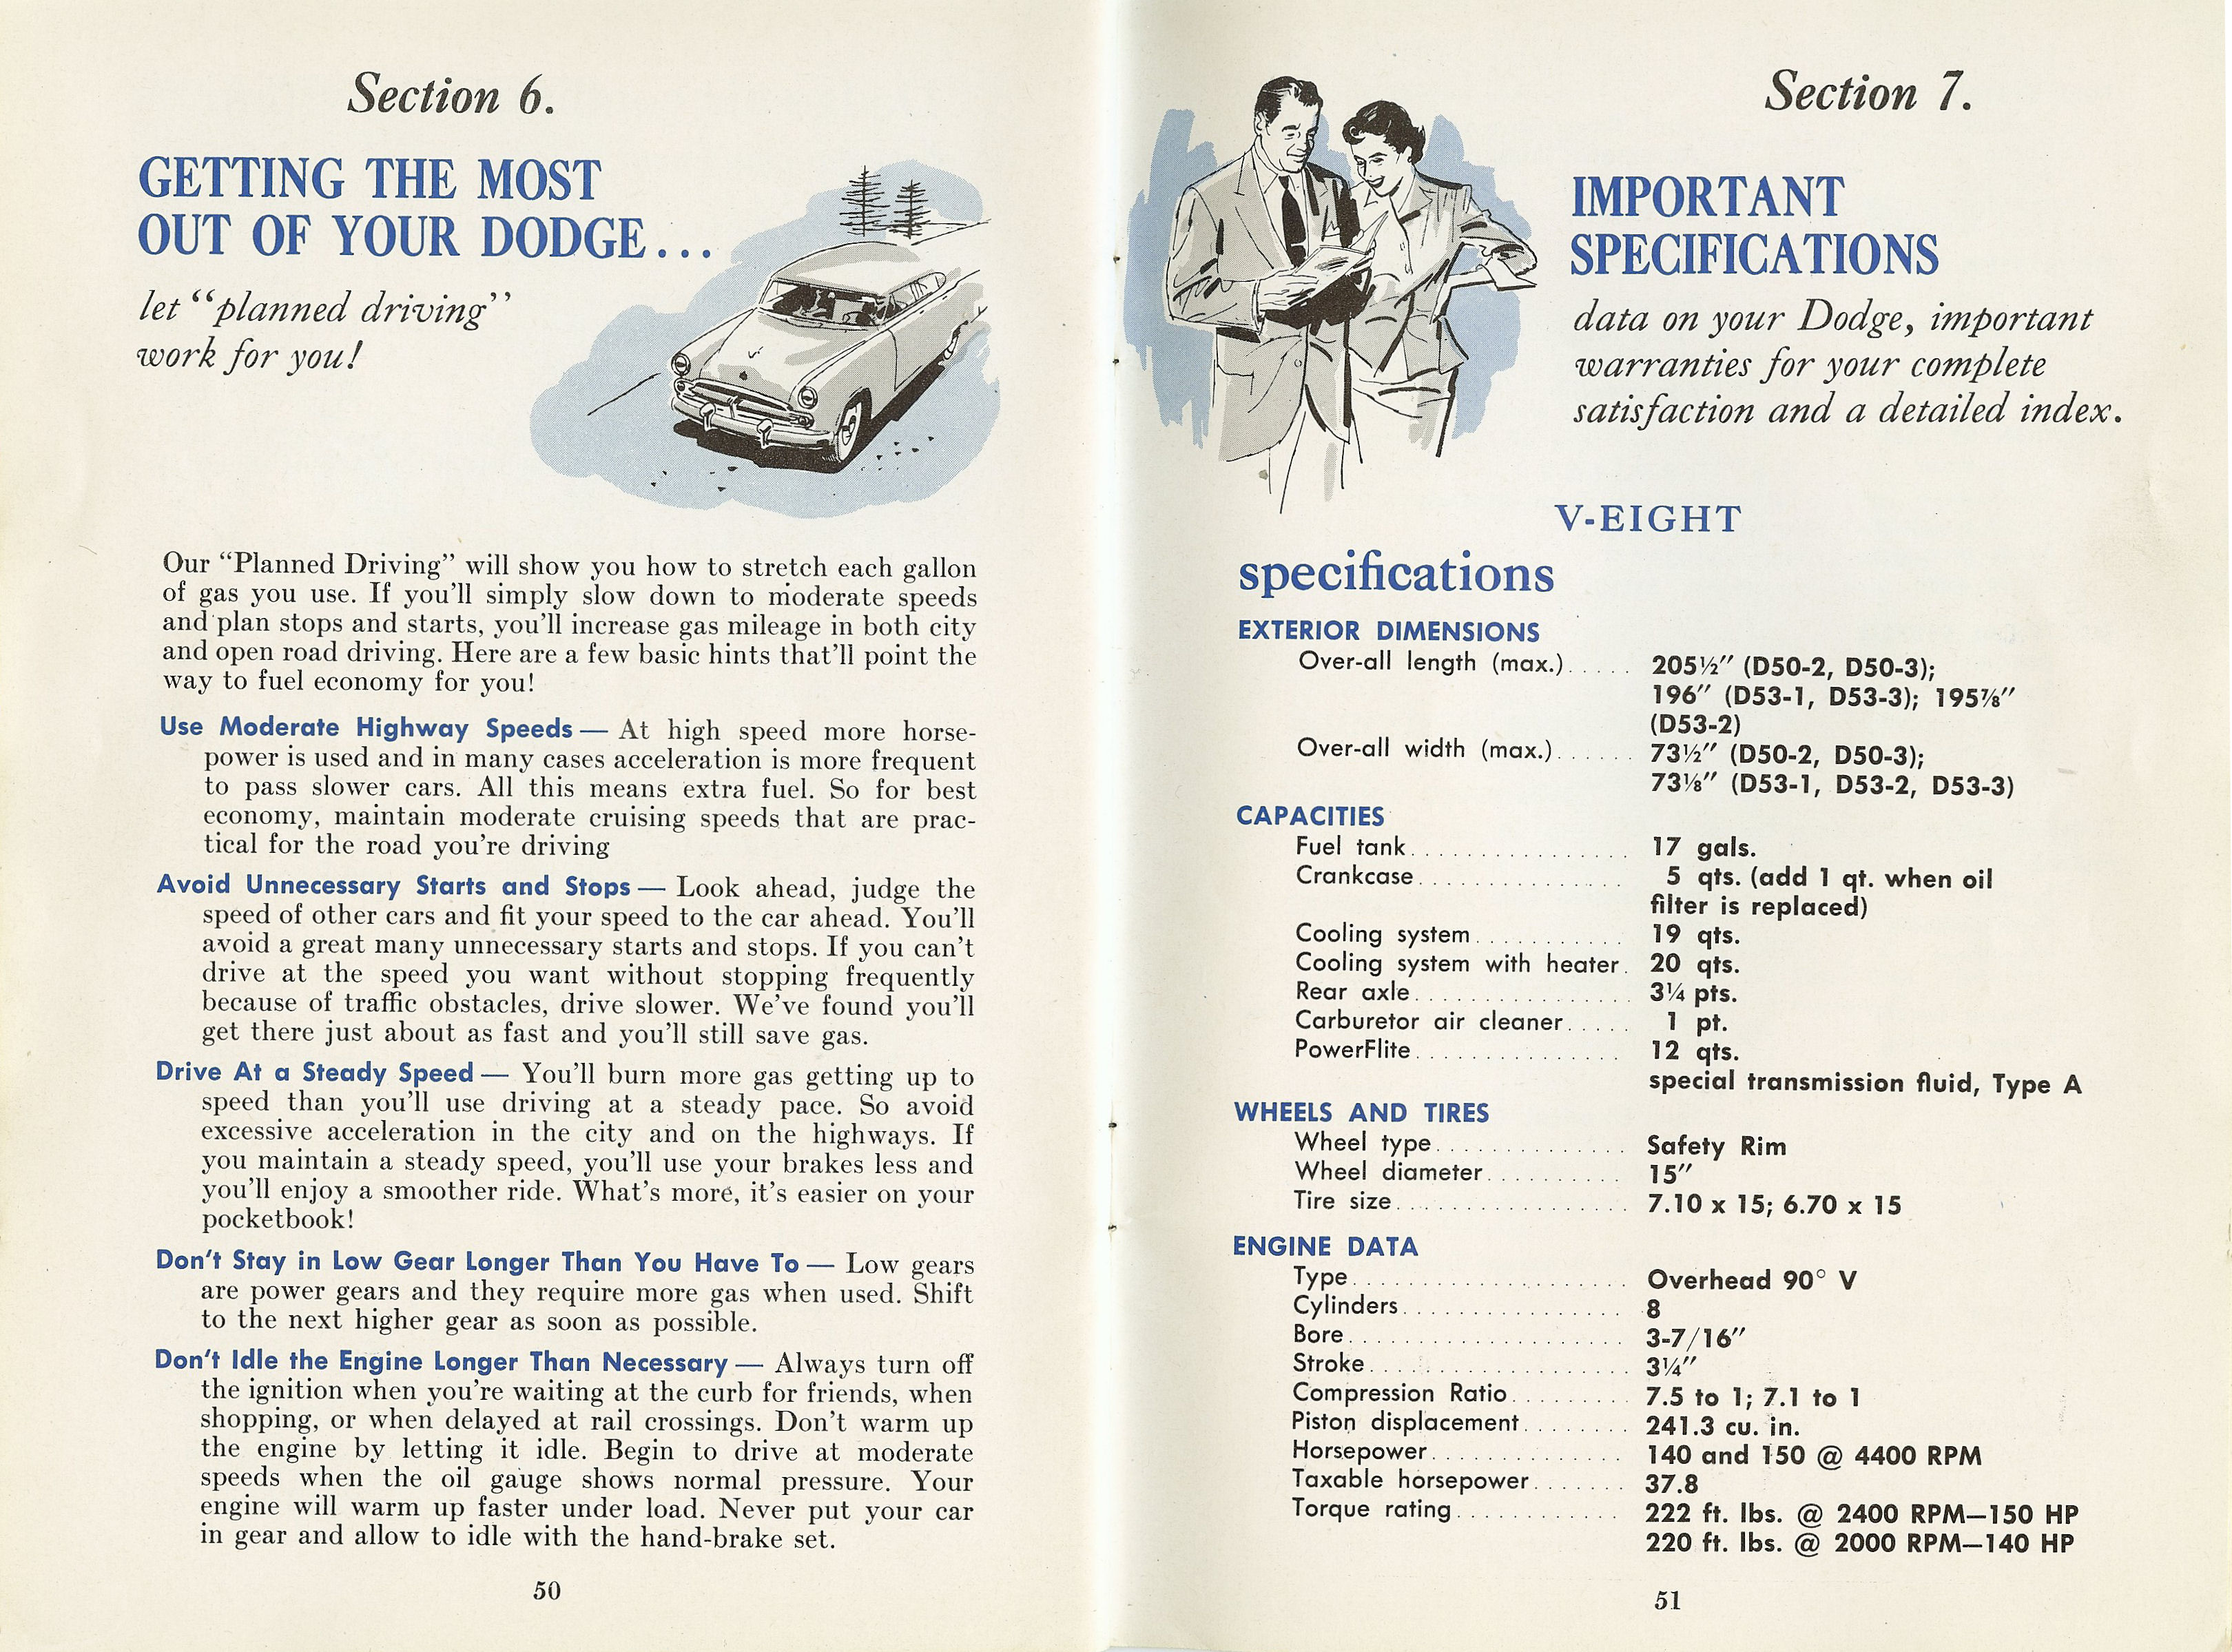 1954_Dodge_Owners_Manual-50-51